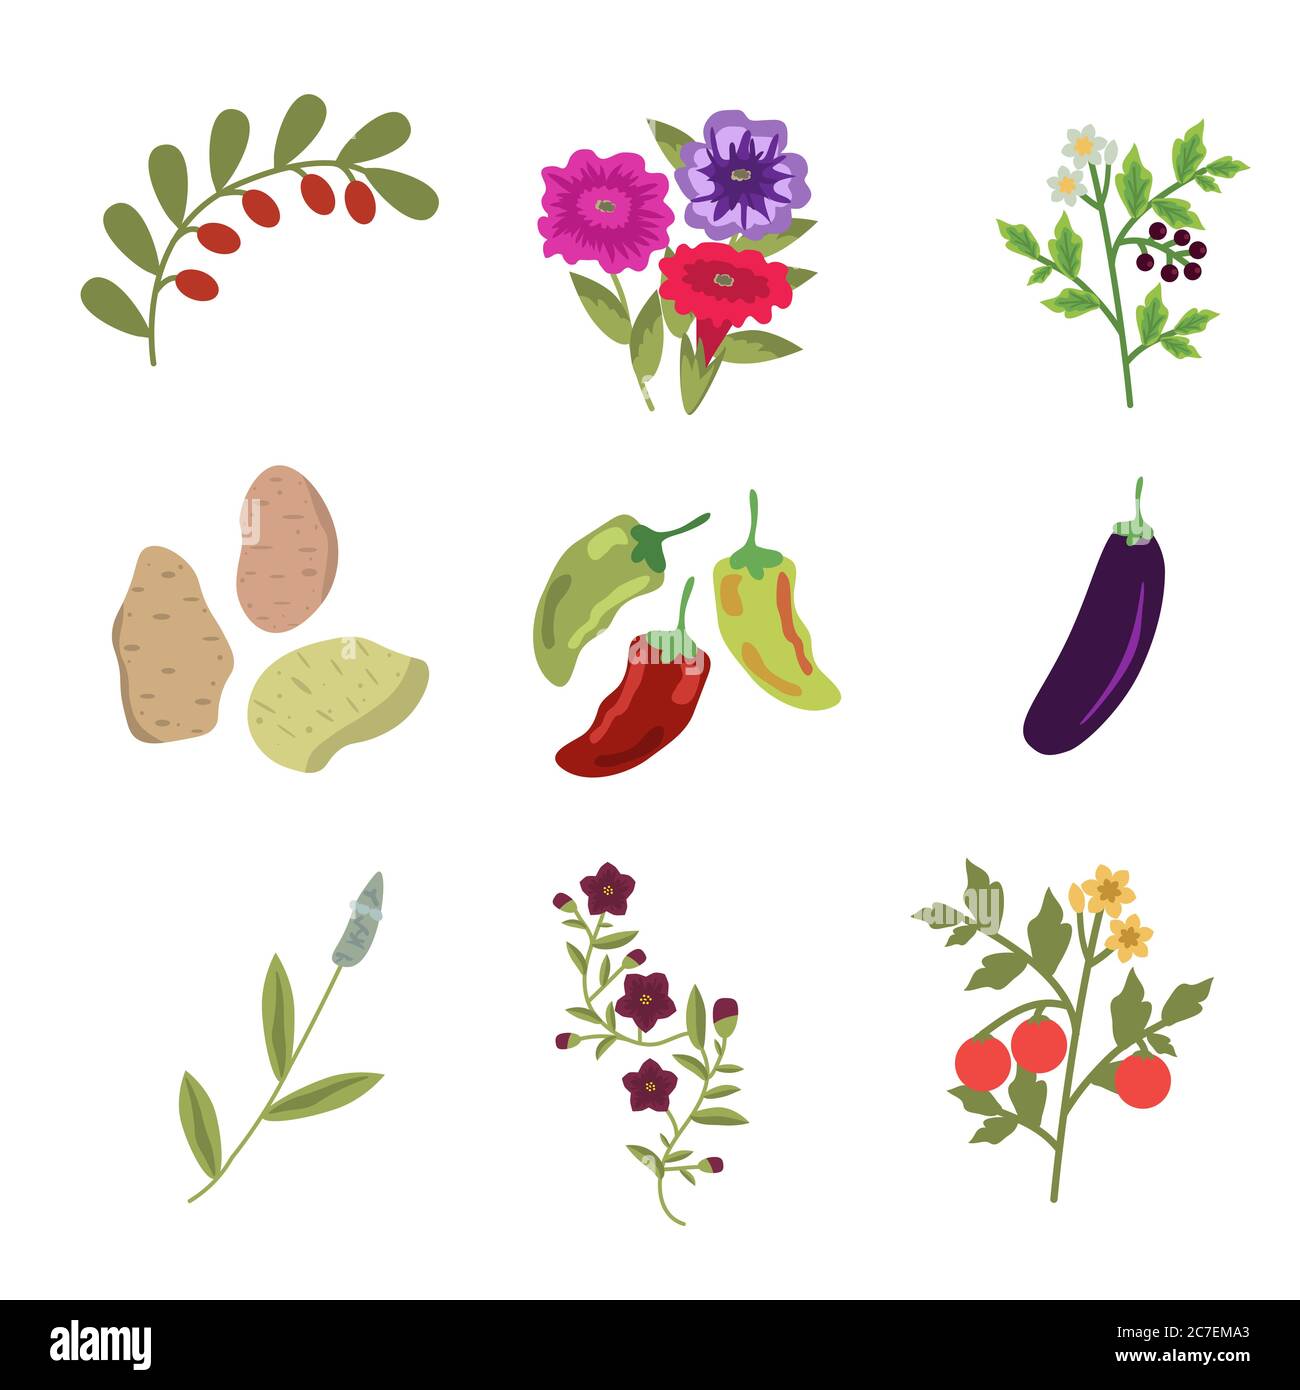 Solanales isolated vector plants set Stock Vector